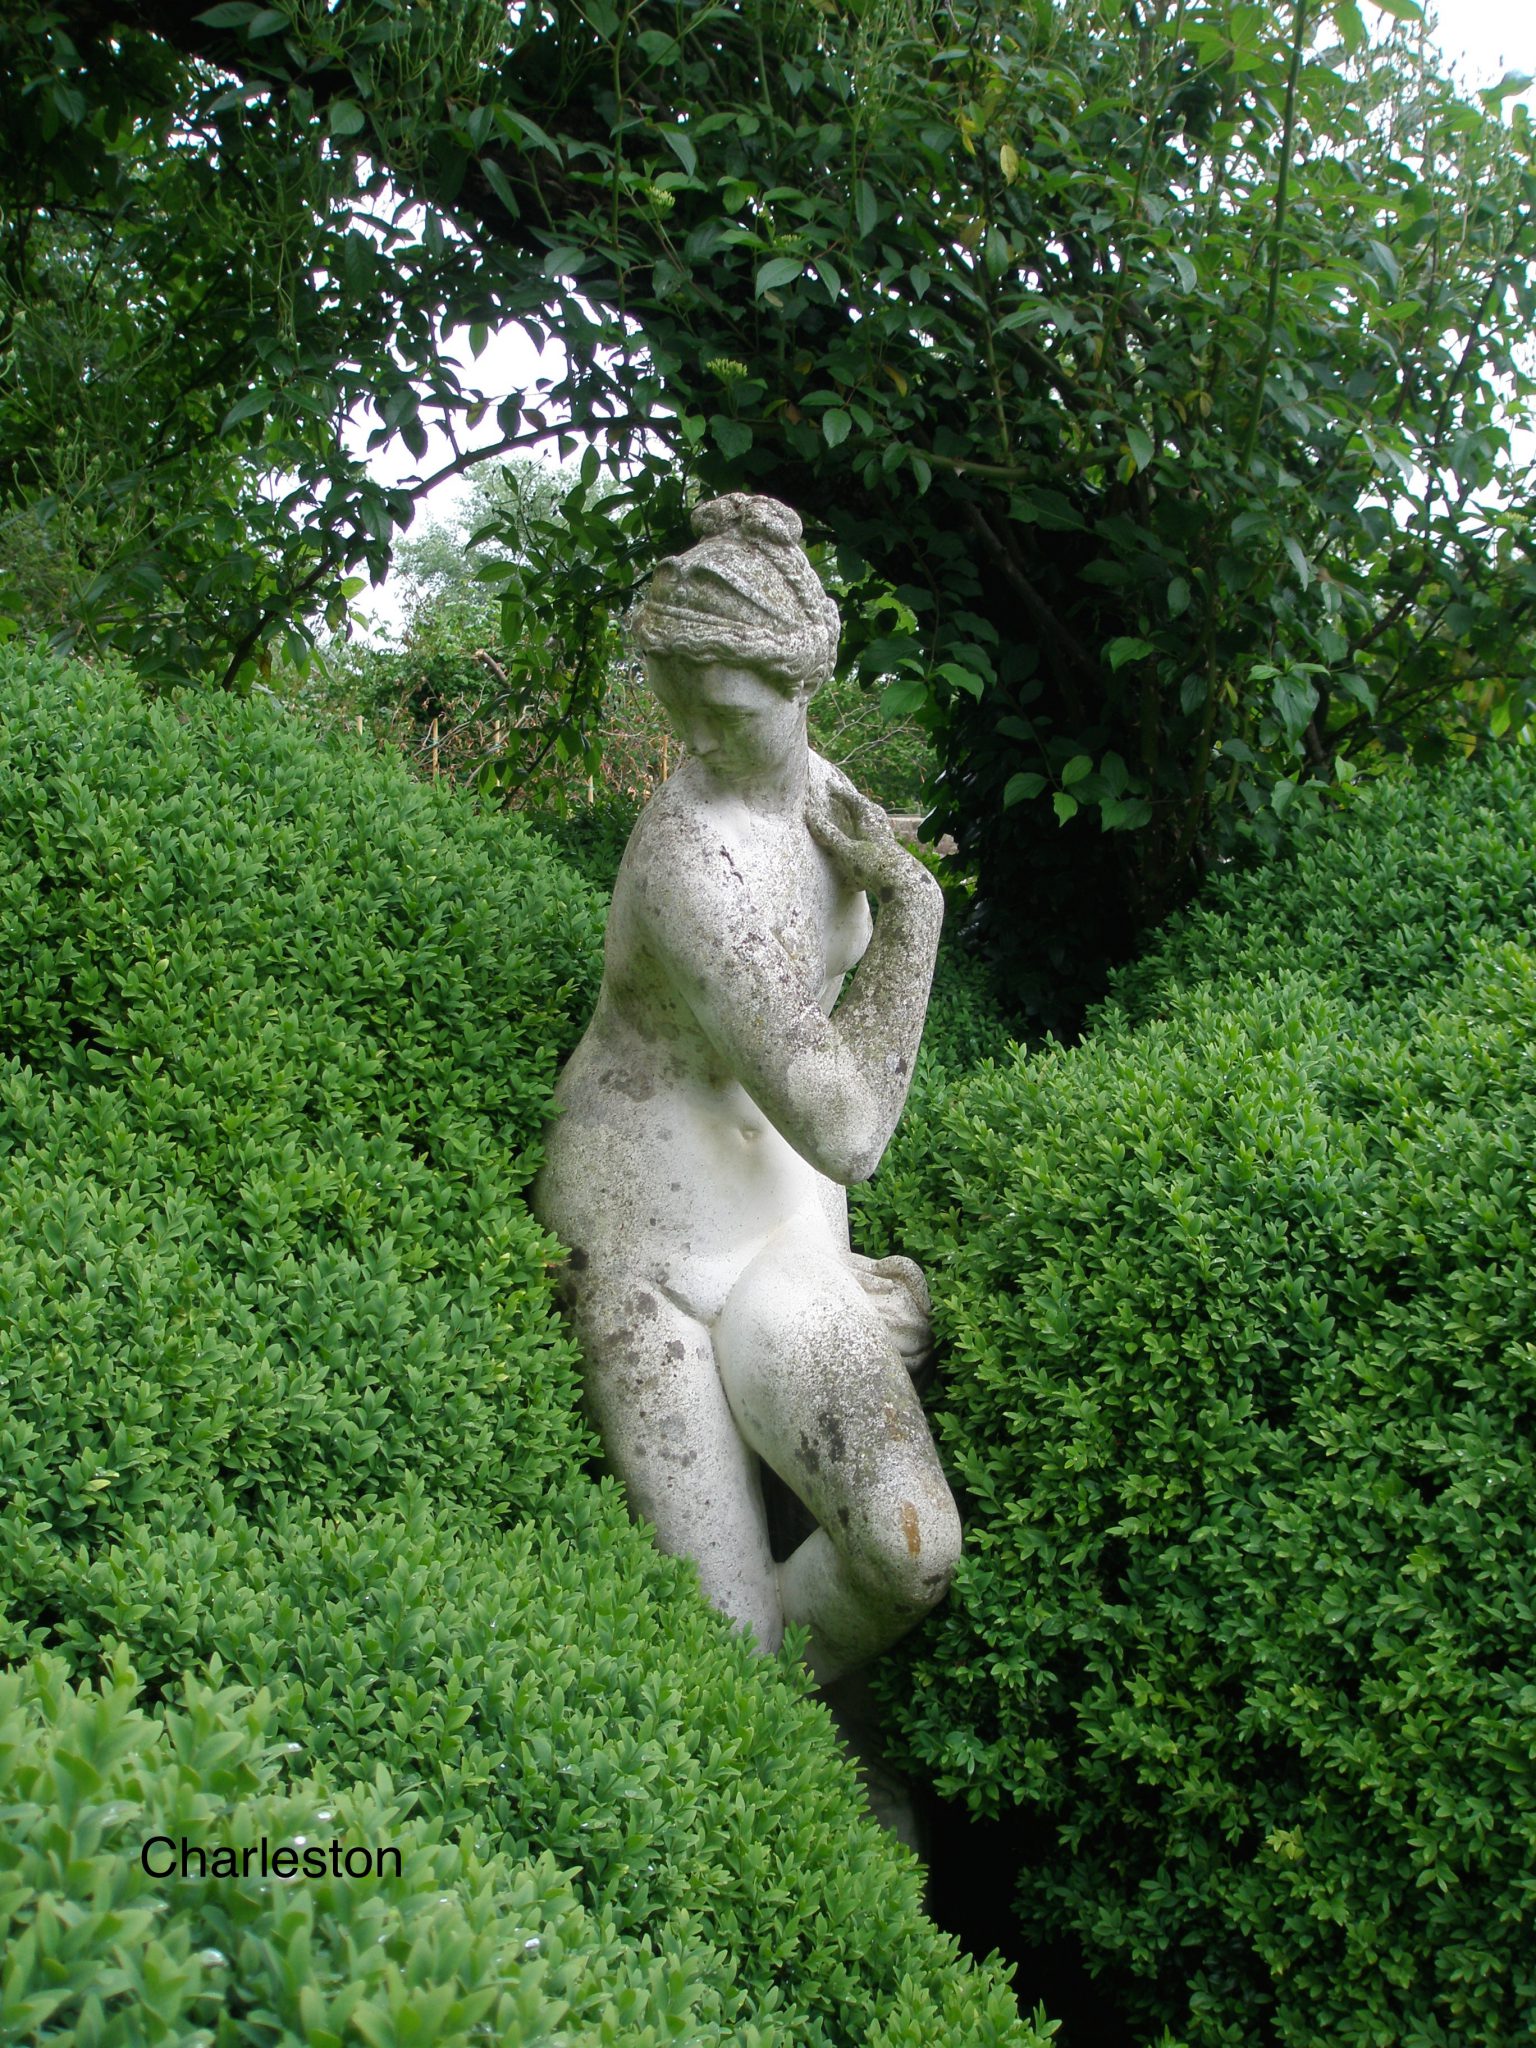 The Lady is tucked into the Drunken Hedge, which extends across the width of the Walled Garden. Drunken Hedges are in themselves a form of living sculpture. ( In a future Diary I'll show you more examples of Drunken Hedges. )